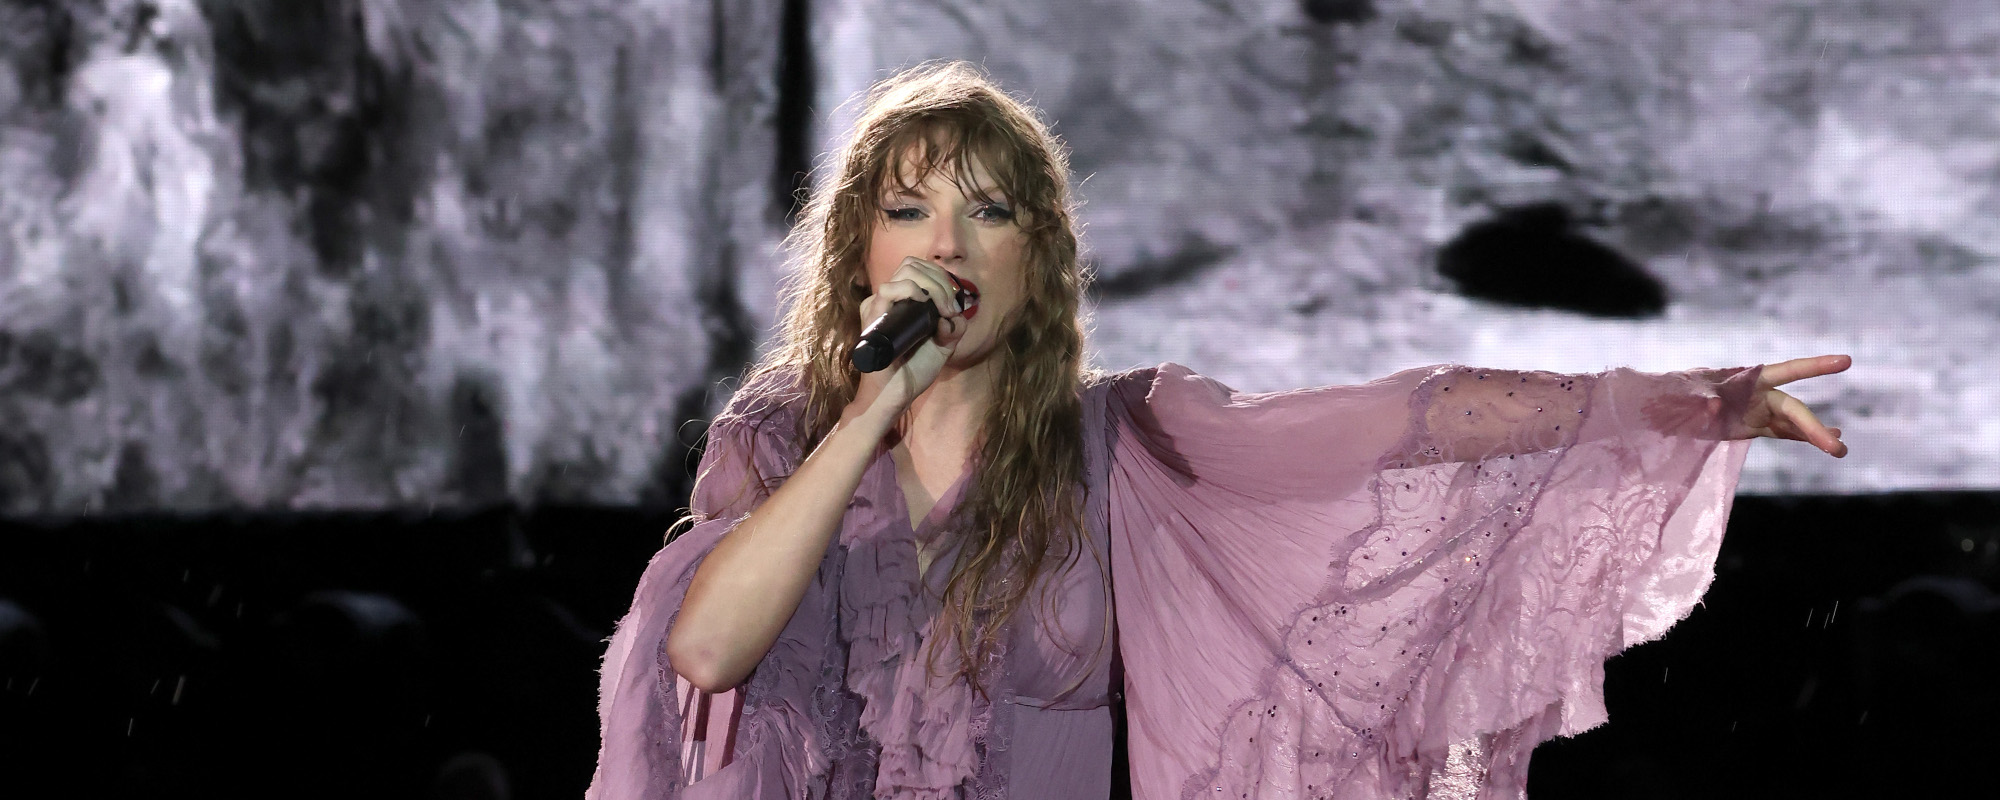 Taylor Swift Performs After Four-Hour ‘Shelter in Place’ Advisory at Nashville Concert